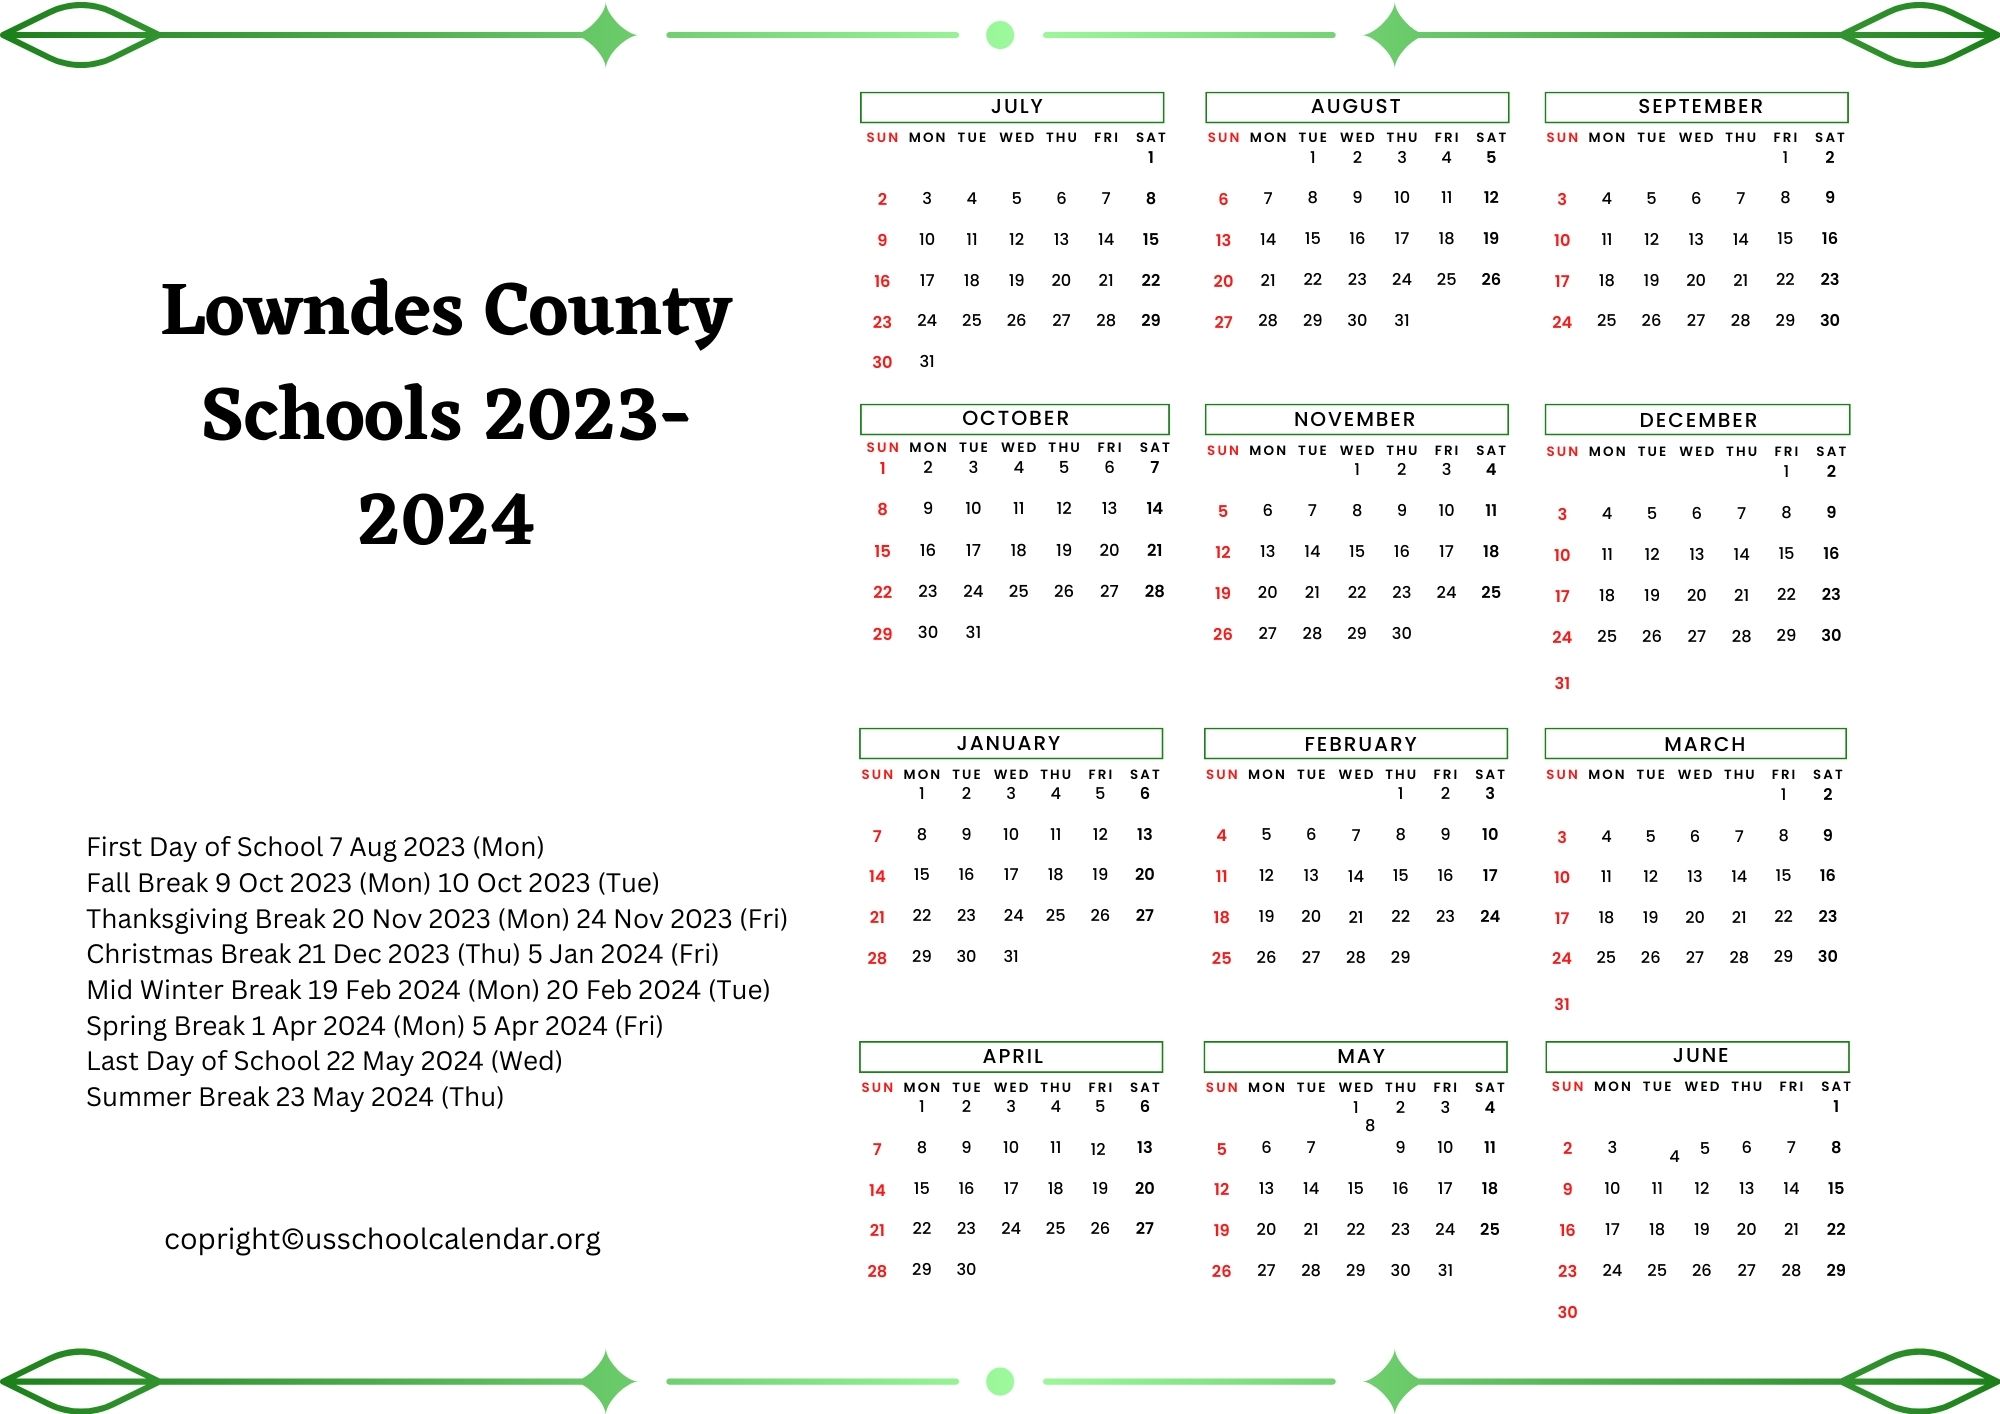 Lowndes County Schools Calendar with Holidays 20232024